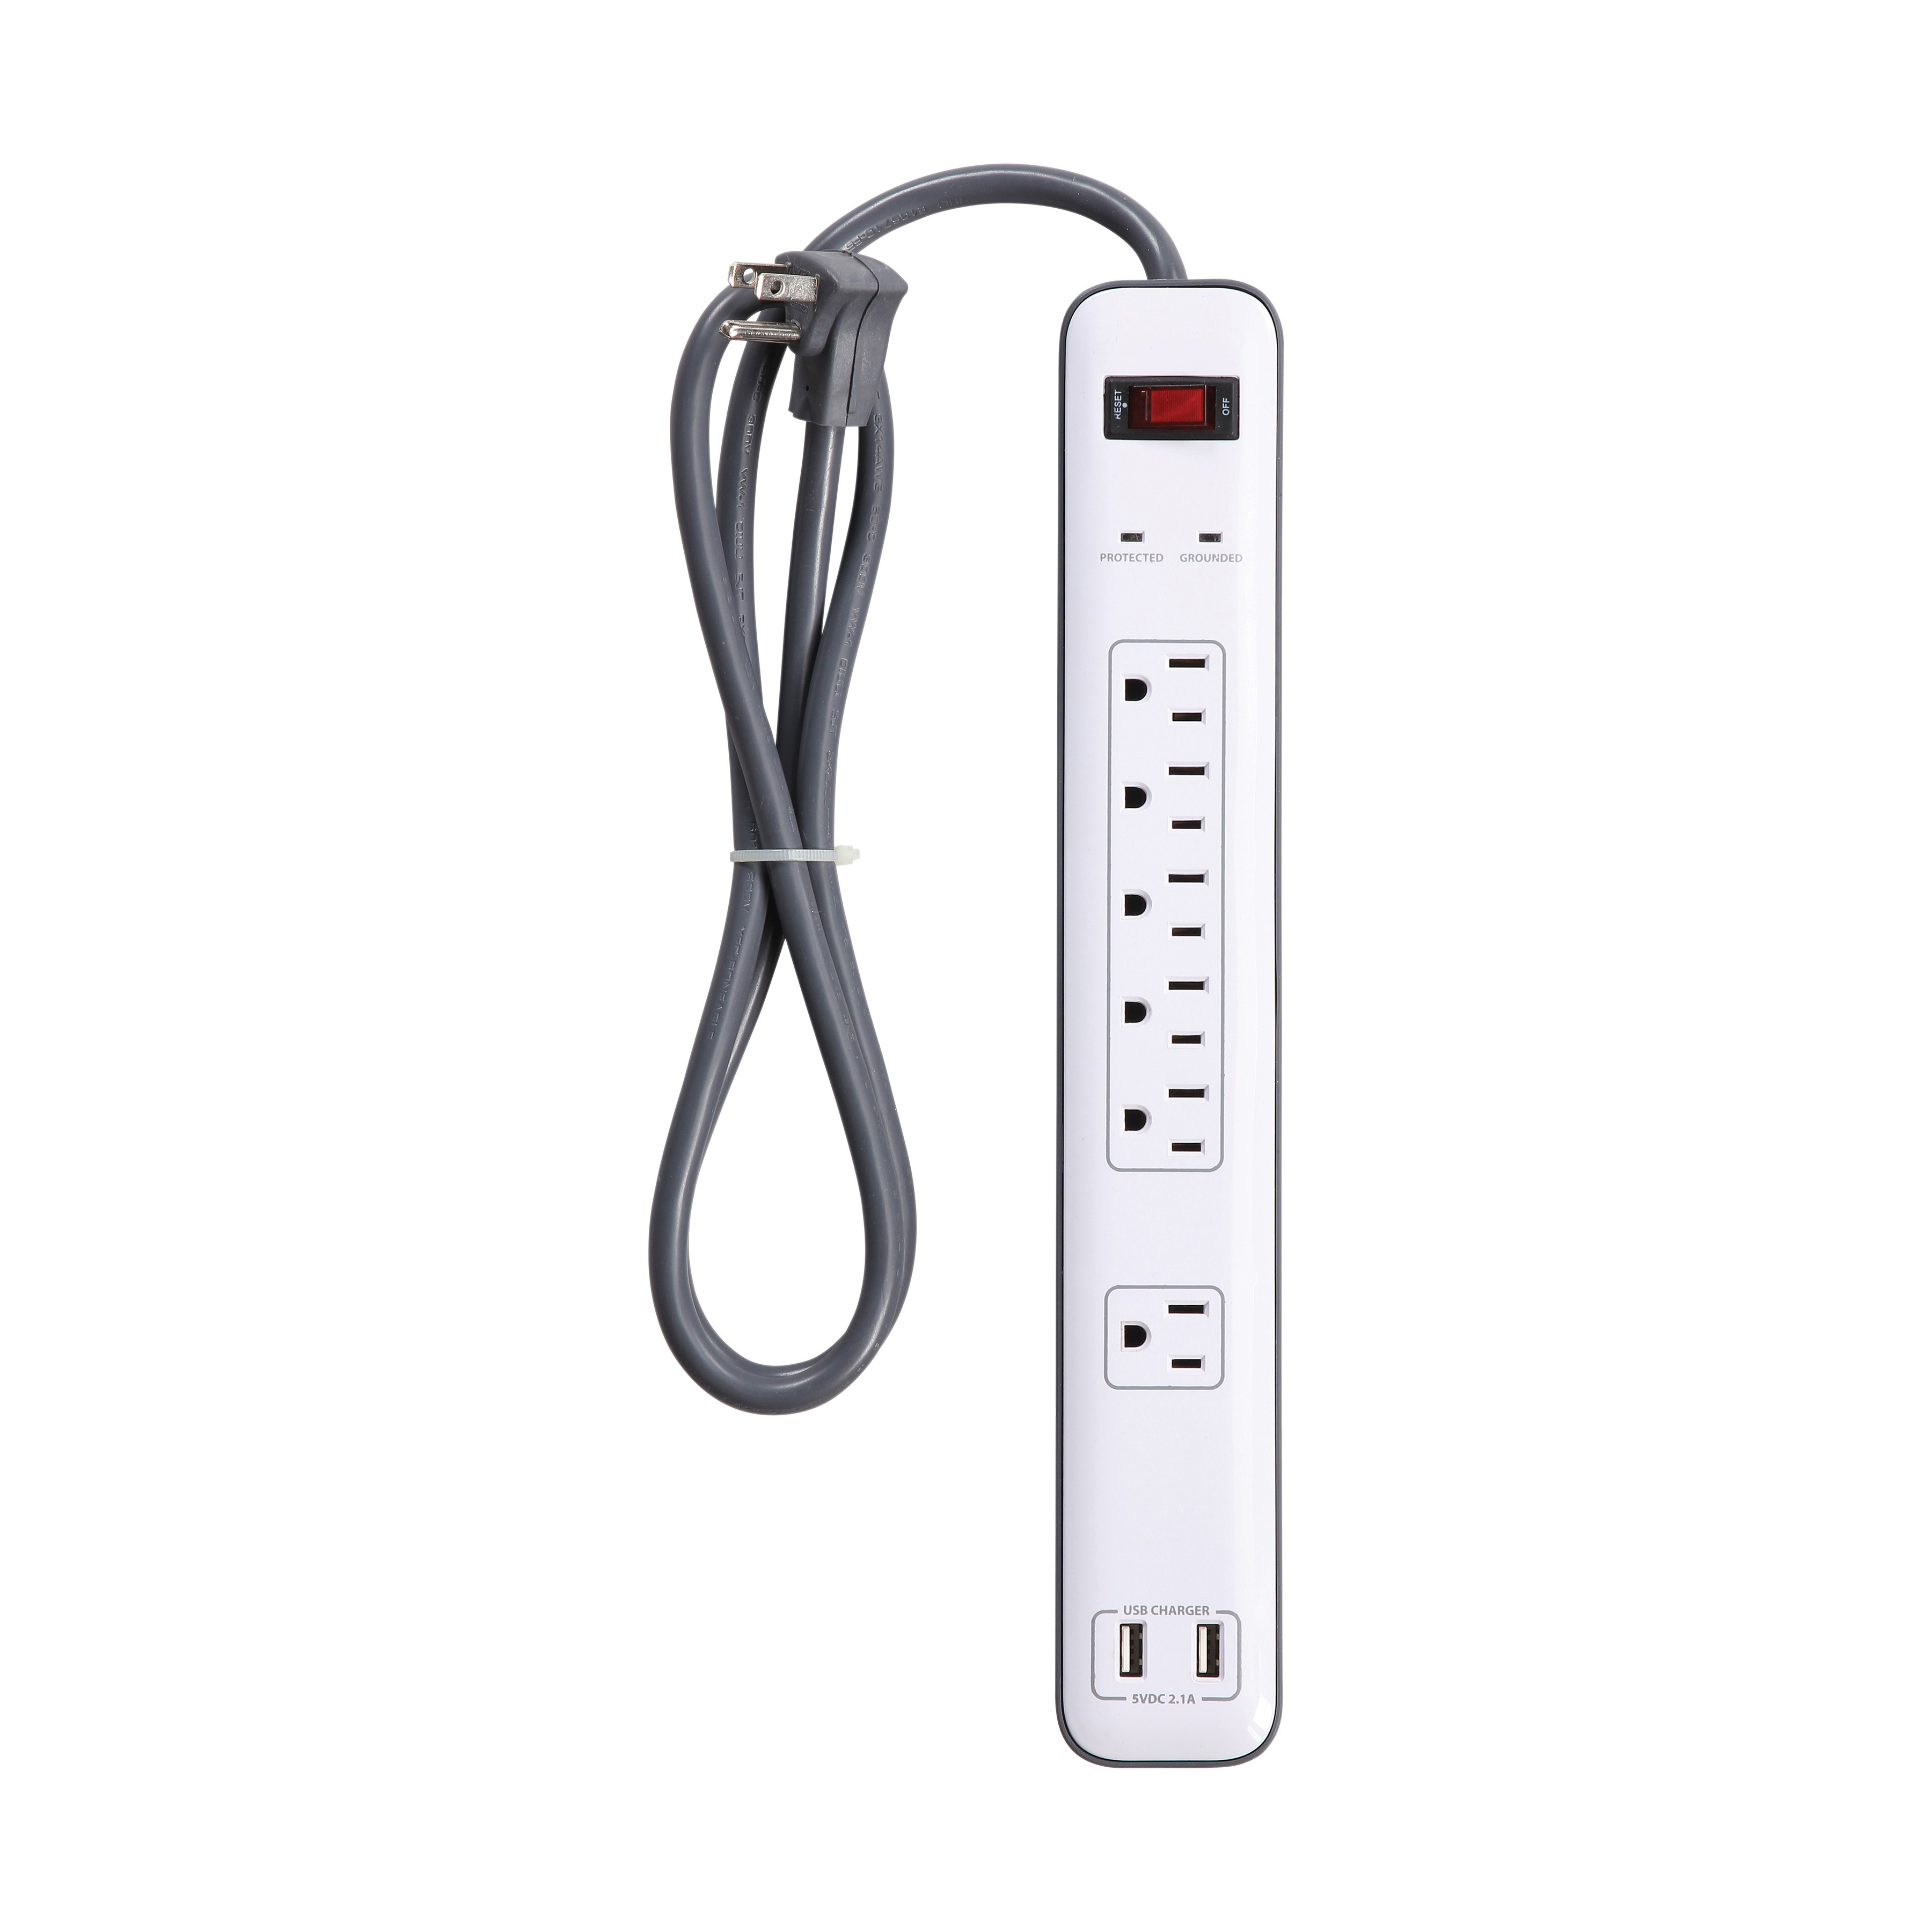 OR525106 Surge Protector Power Strip, 6 Three-Prong-Outlet, 125 V, 15 A, White